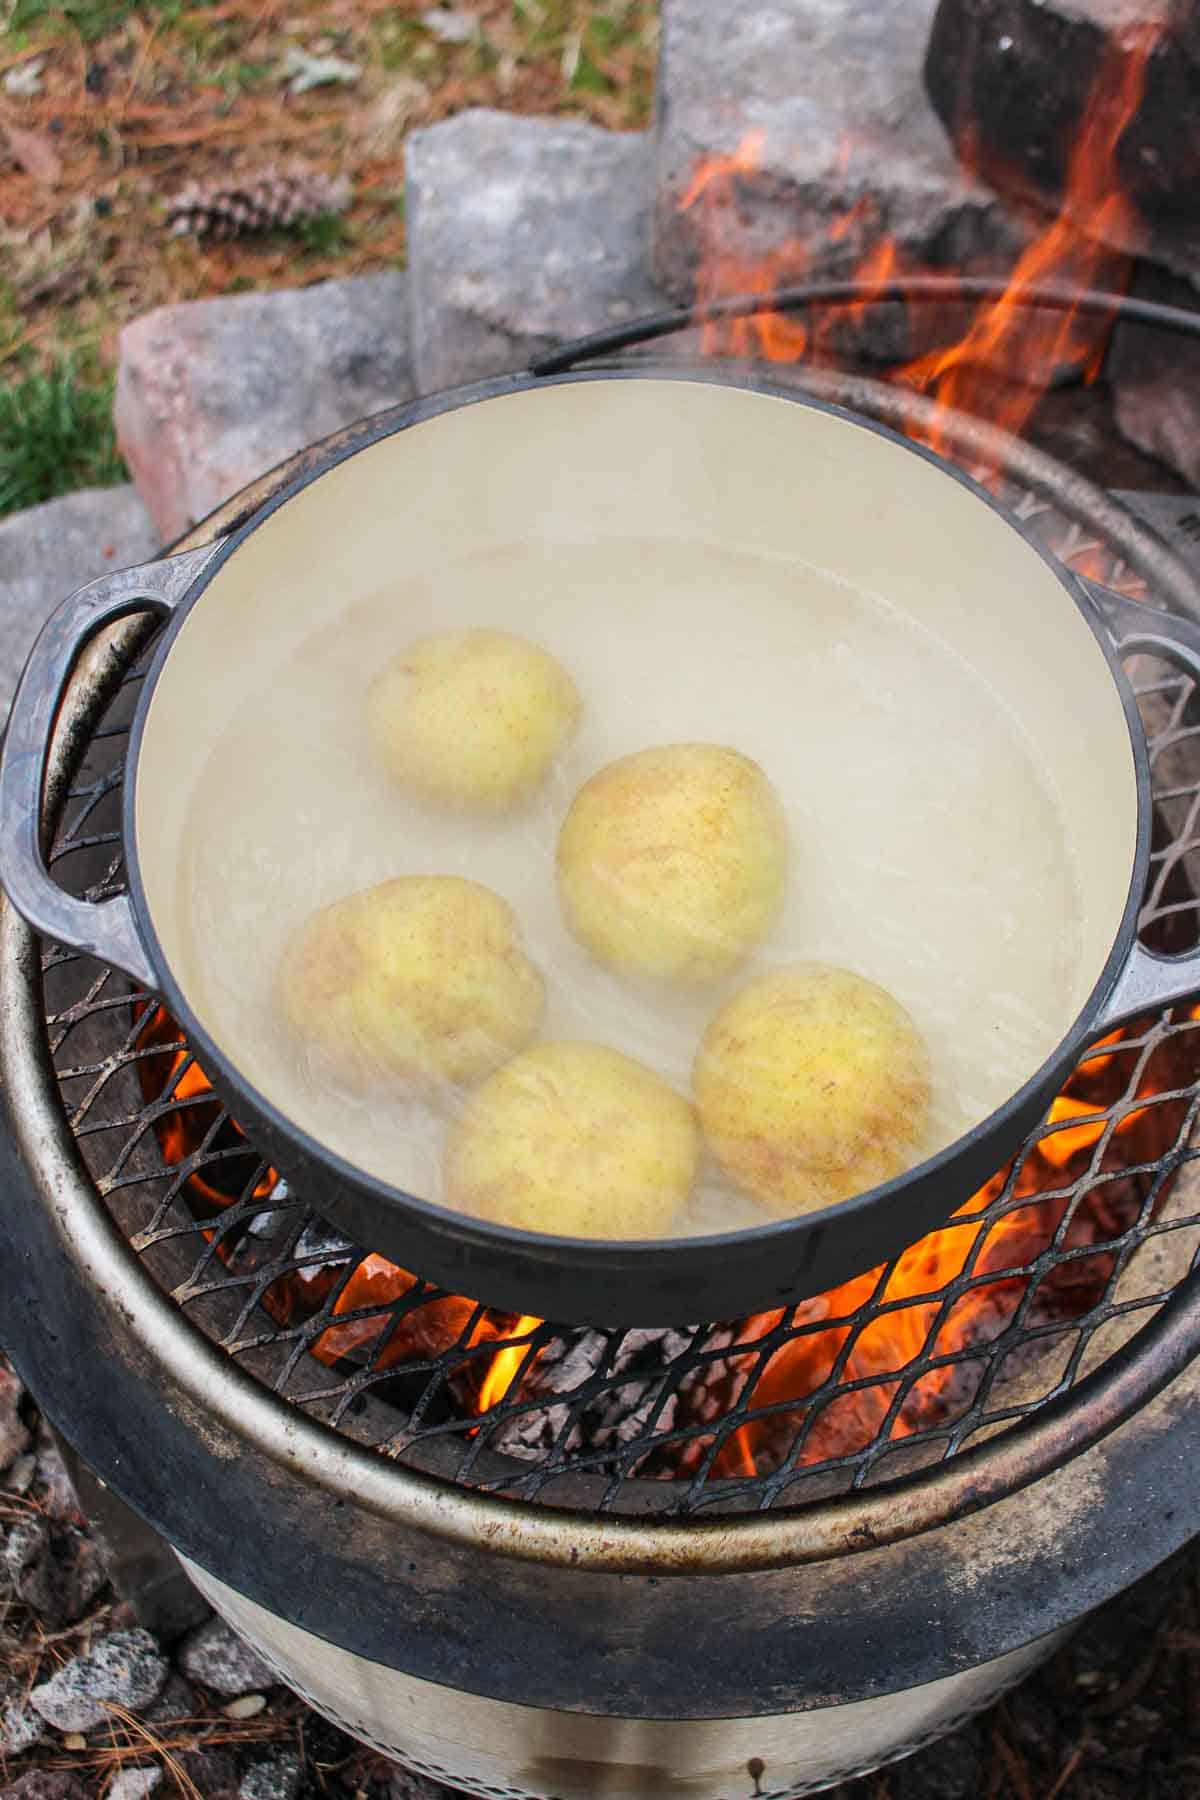 The whole potatoes in boiling water on the grill.